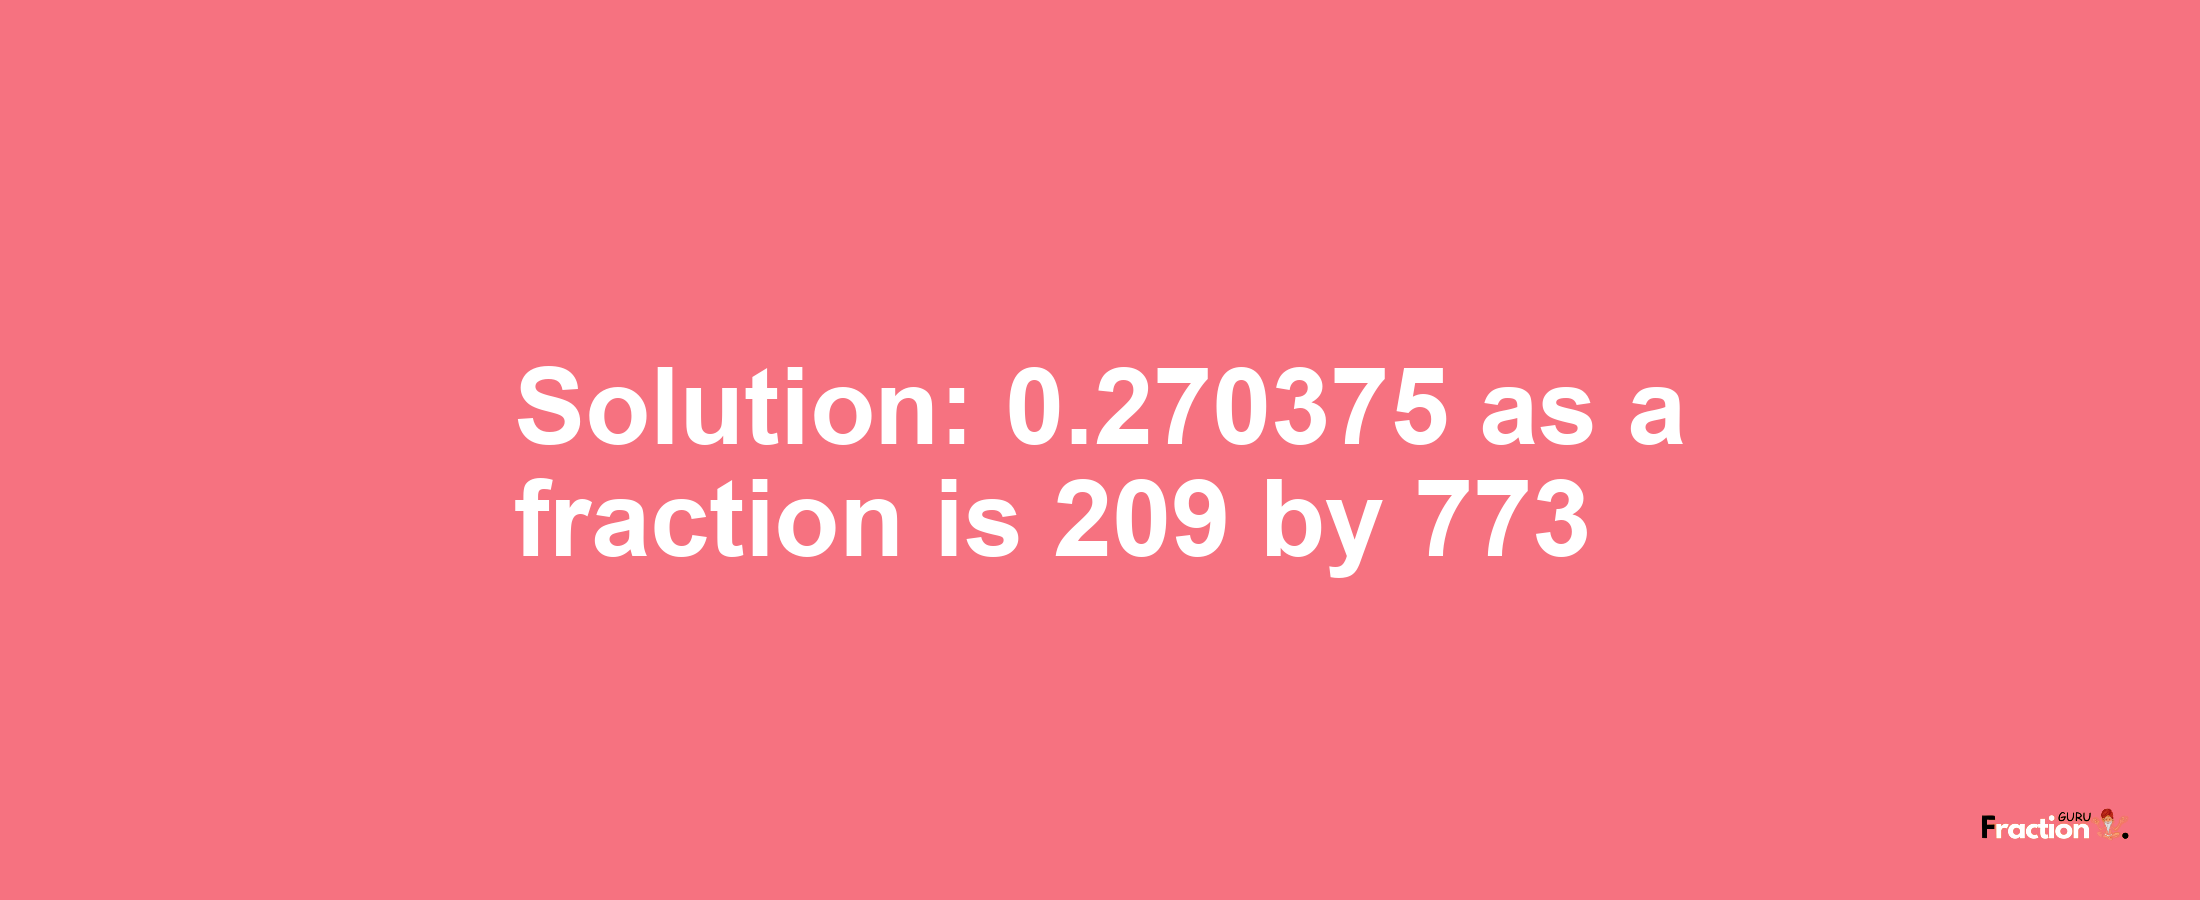 Solution:0.270375 as a fraction is 209/773